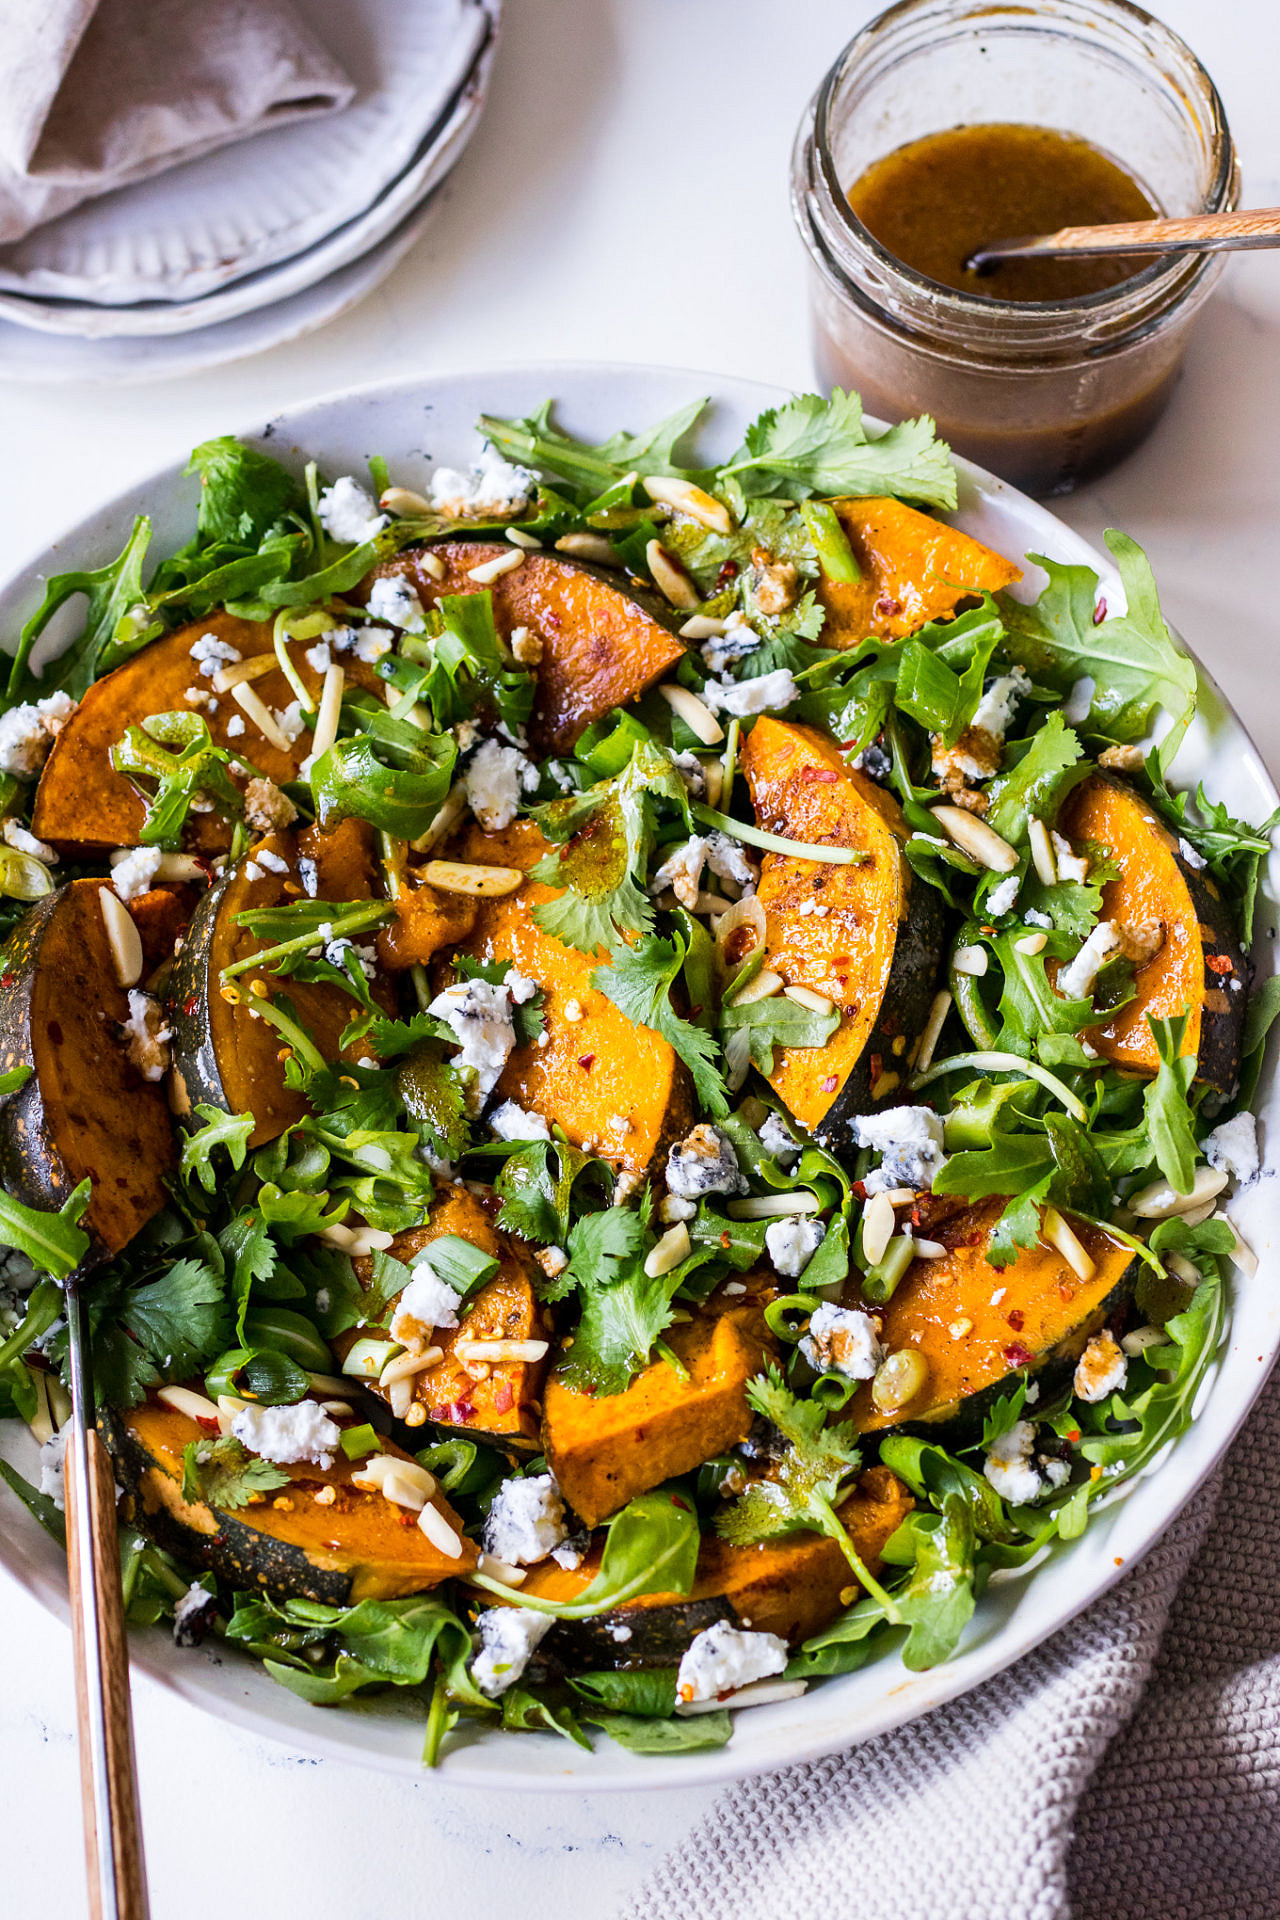 Roasted pumpkin, goats cheese and rocket salad in shallow ceramic bowl with balsamic dressing